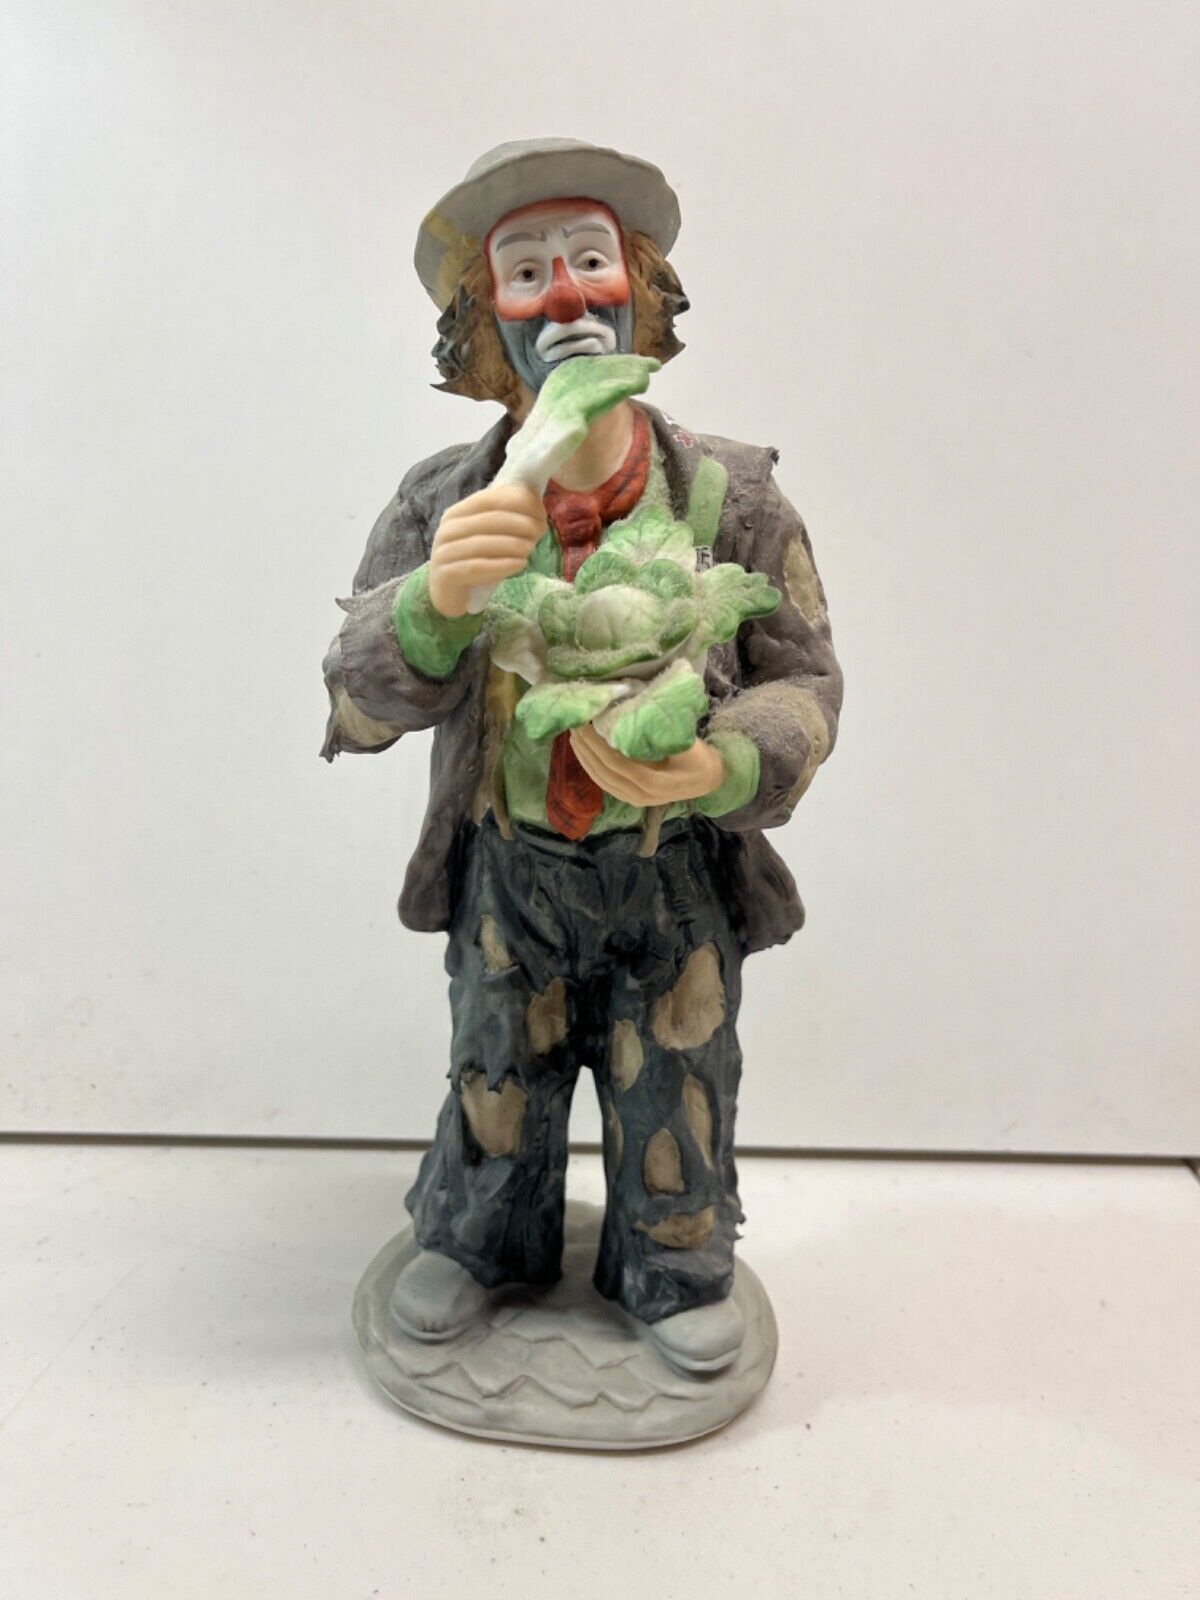 Emmett Kelly Jr. Clown Figurine eating cabbage Limited Edition 5500 out of 12000